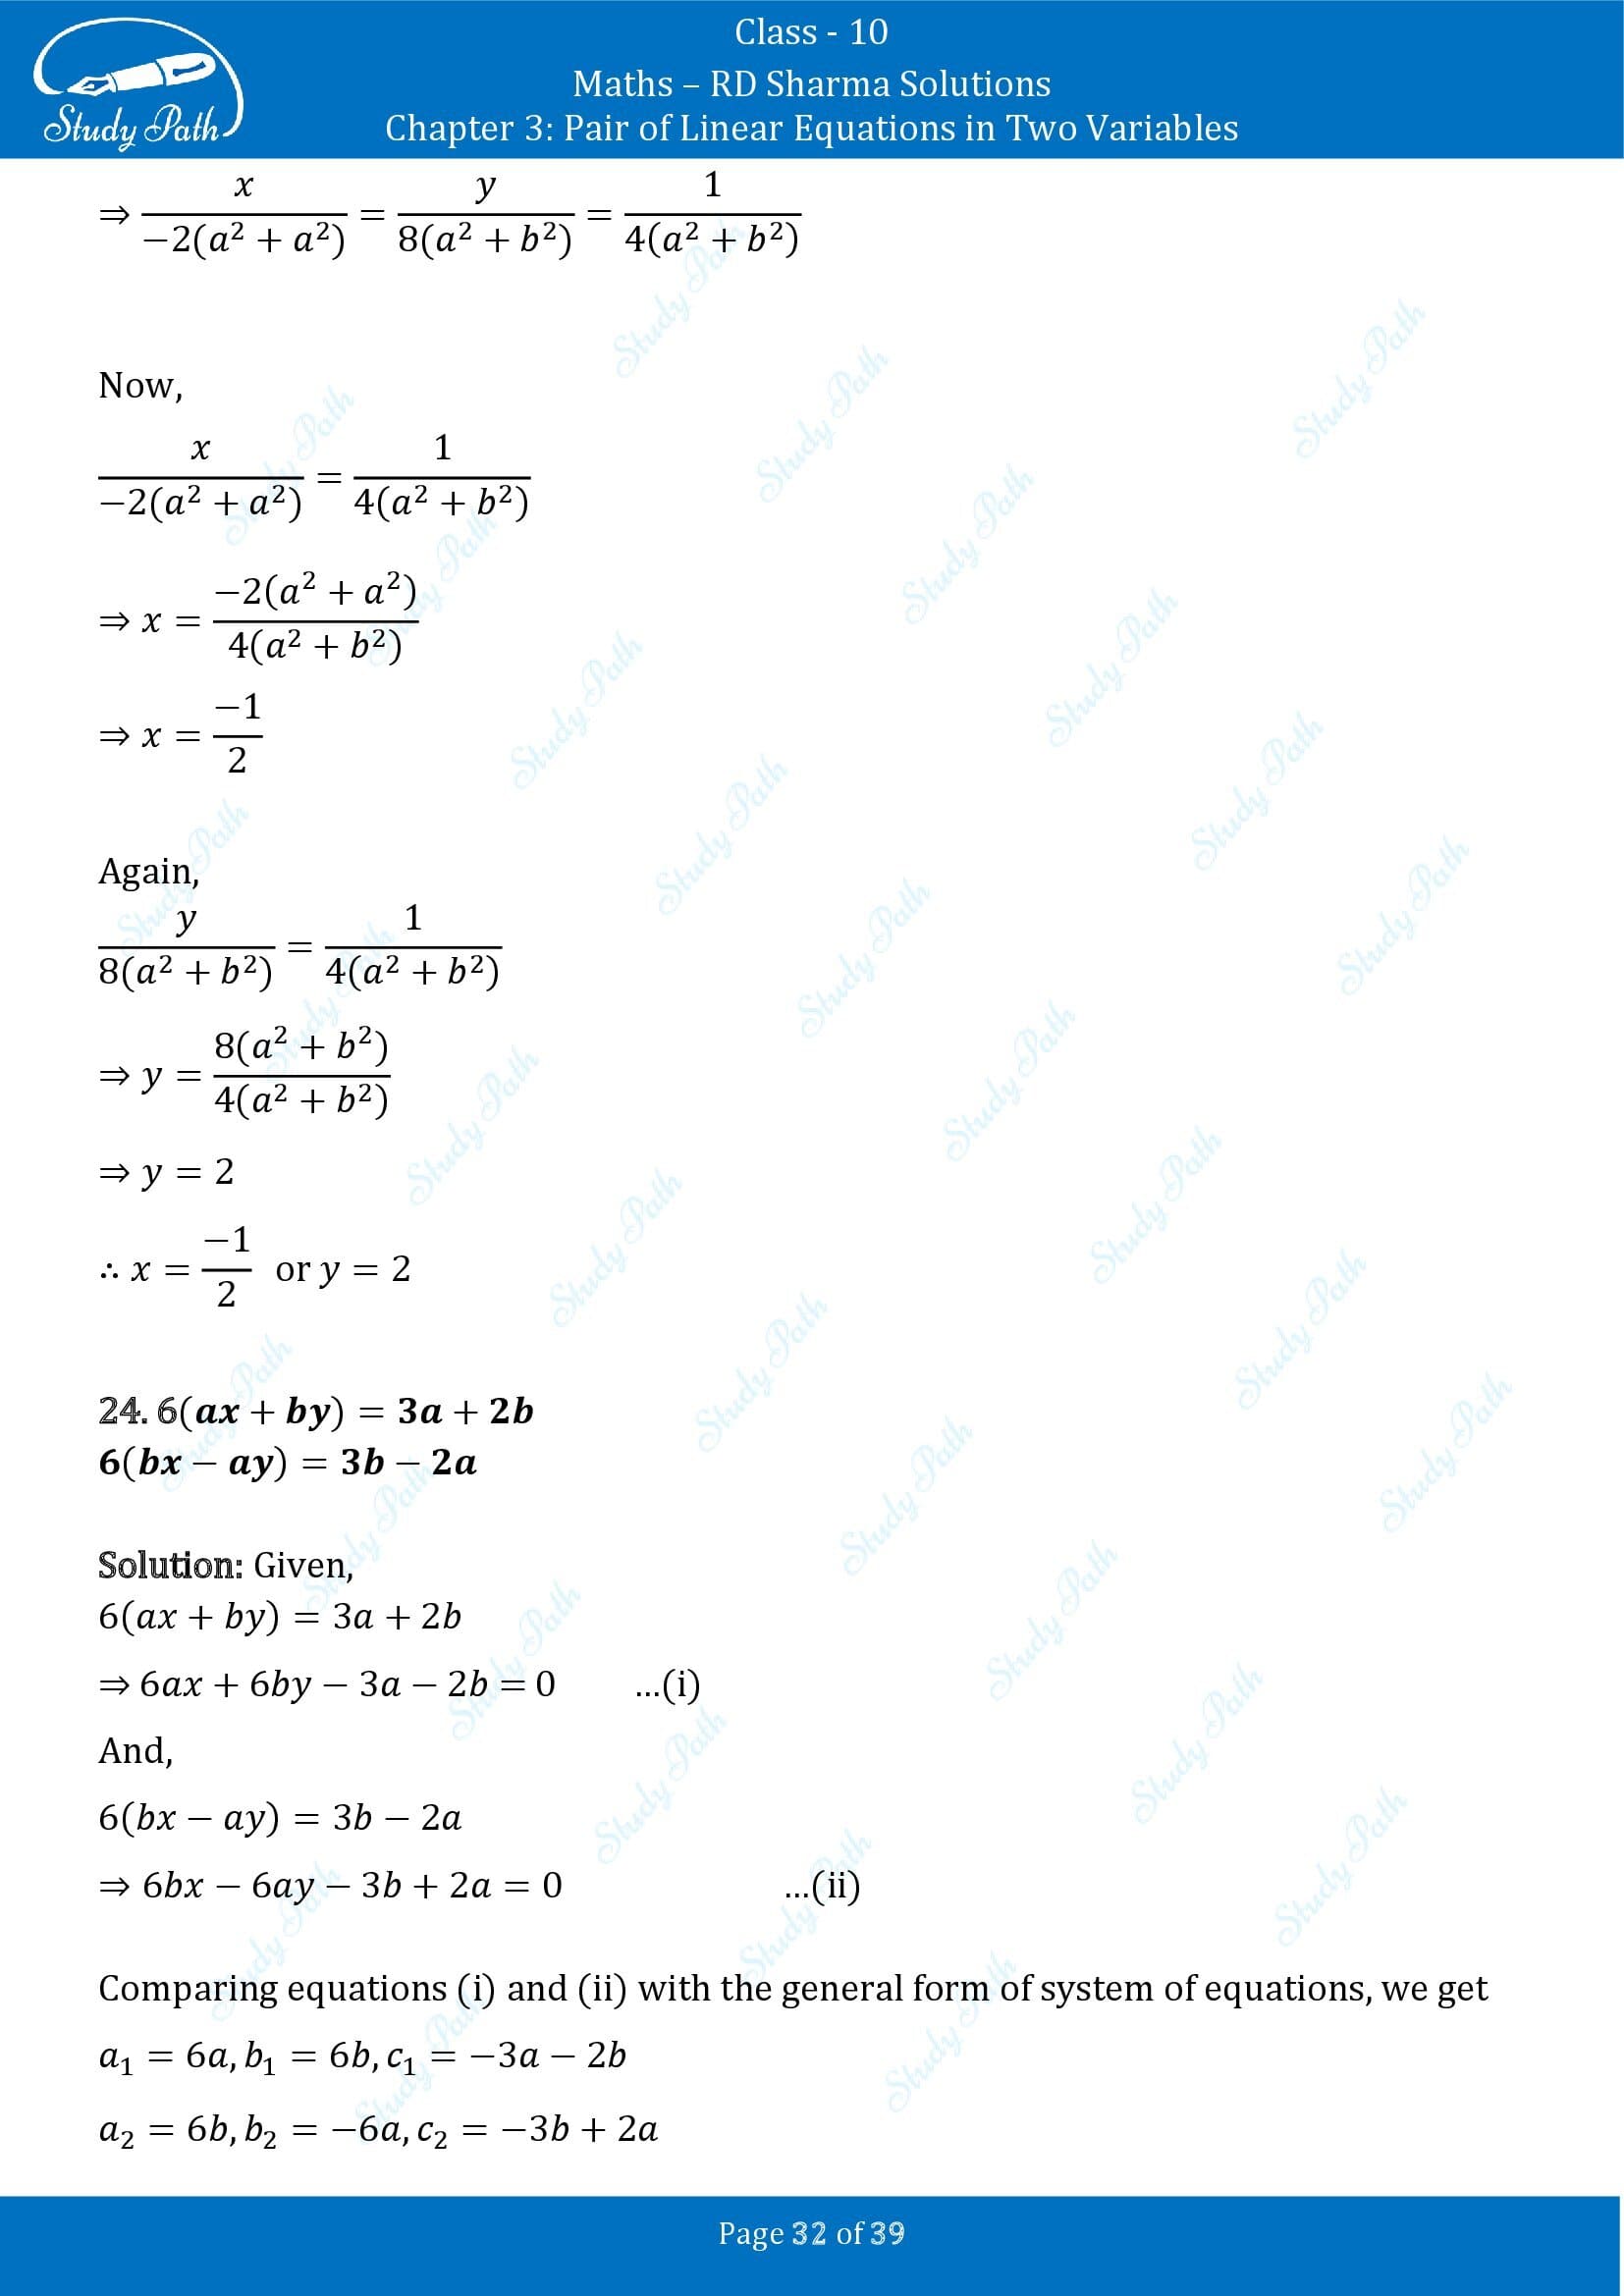 RD Sharma Solutions Class 10 Chapter 3 Pair of Linear Equations in Two Variables Exercise 3.4 00032